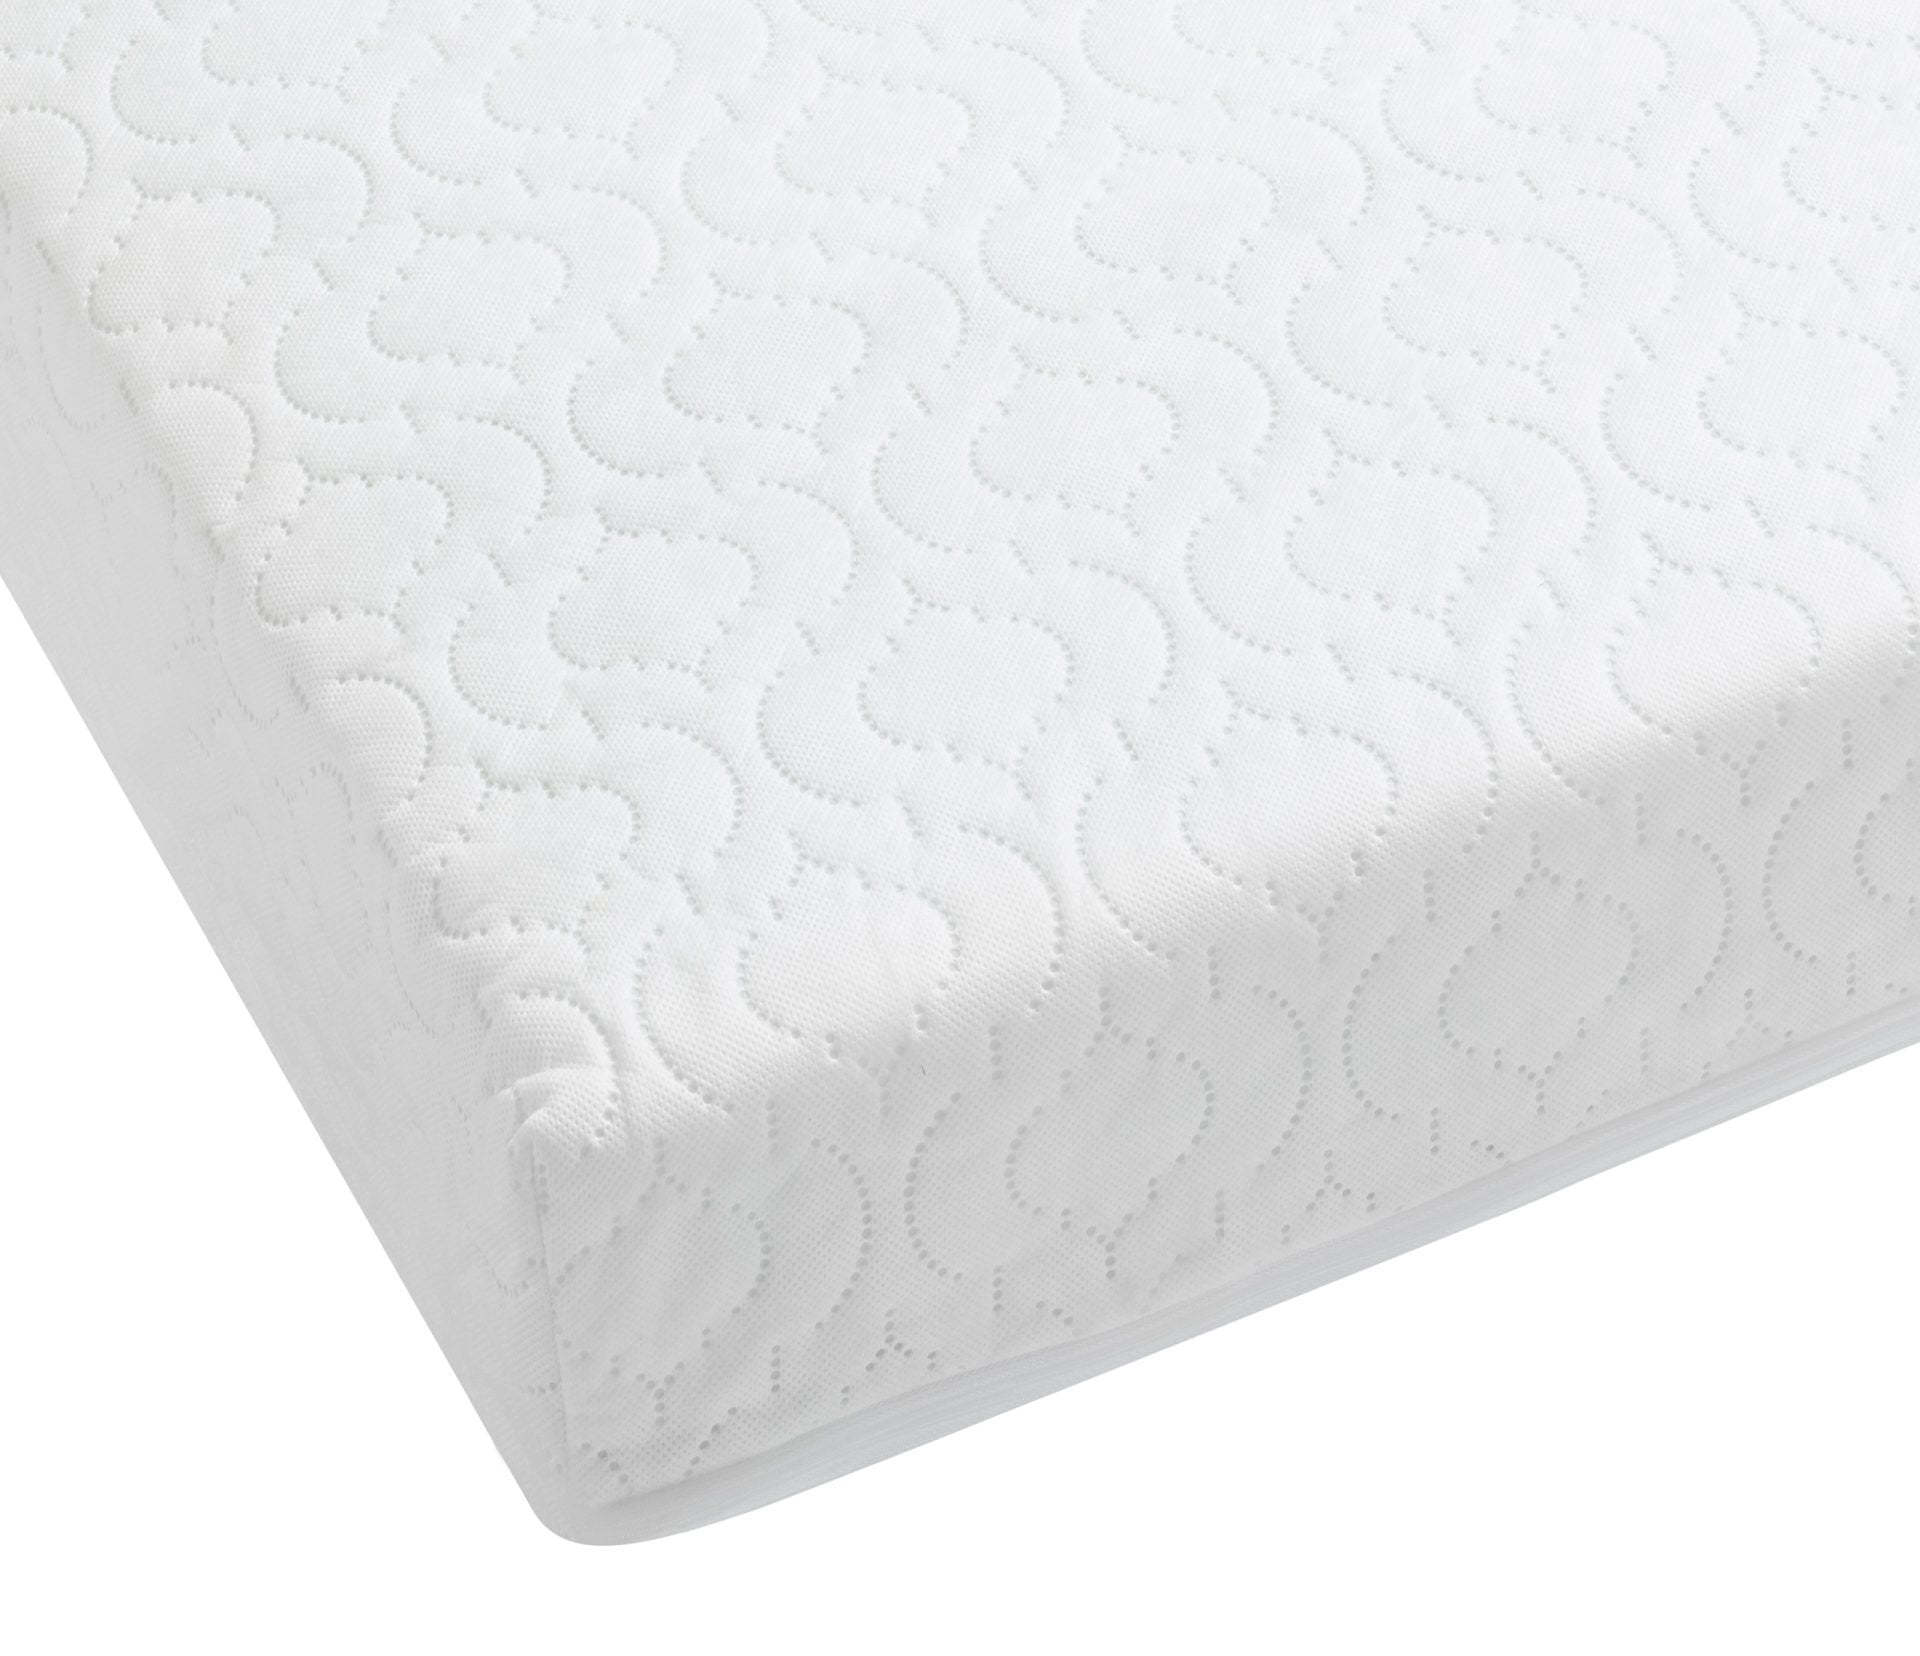 View Babymore Deluxe Sprung Cot Bed Mattress 140 x 70 x 10 CM information